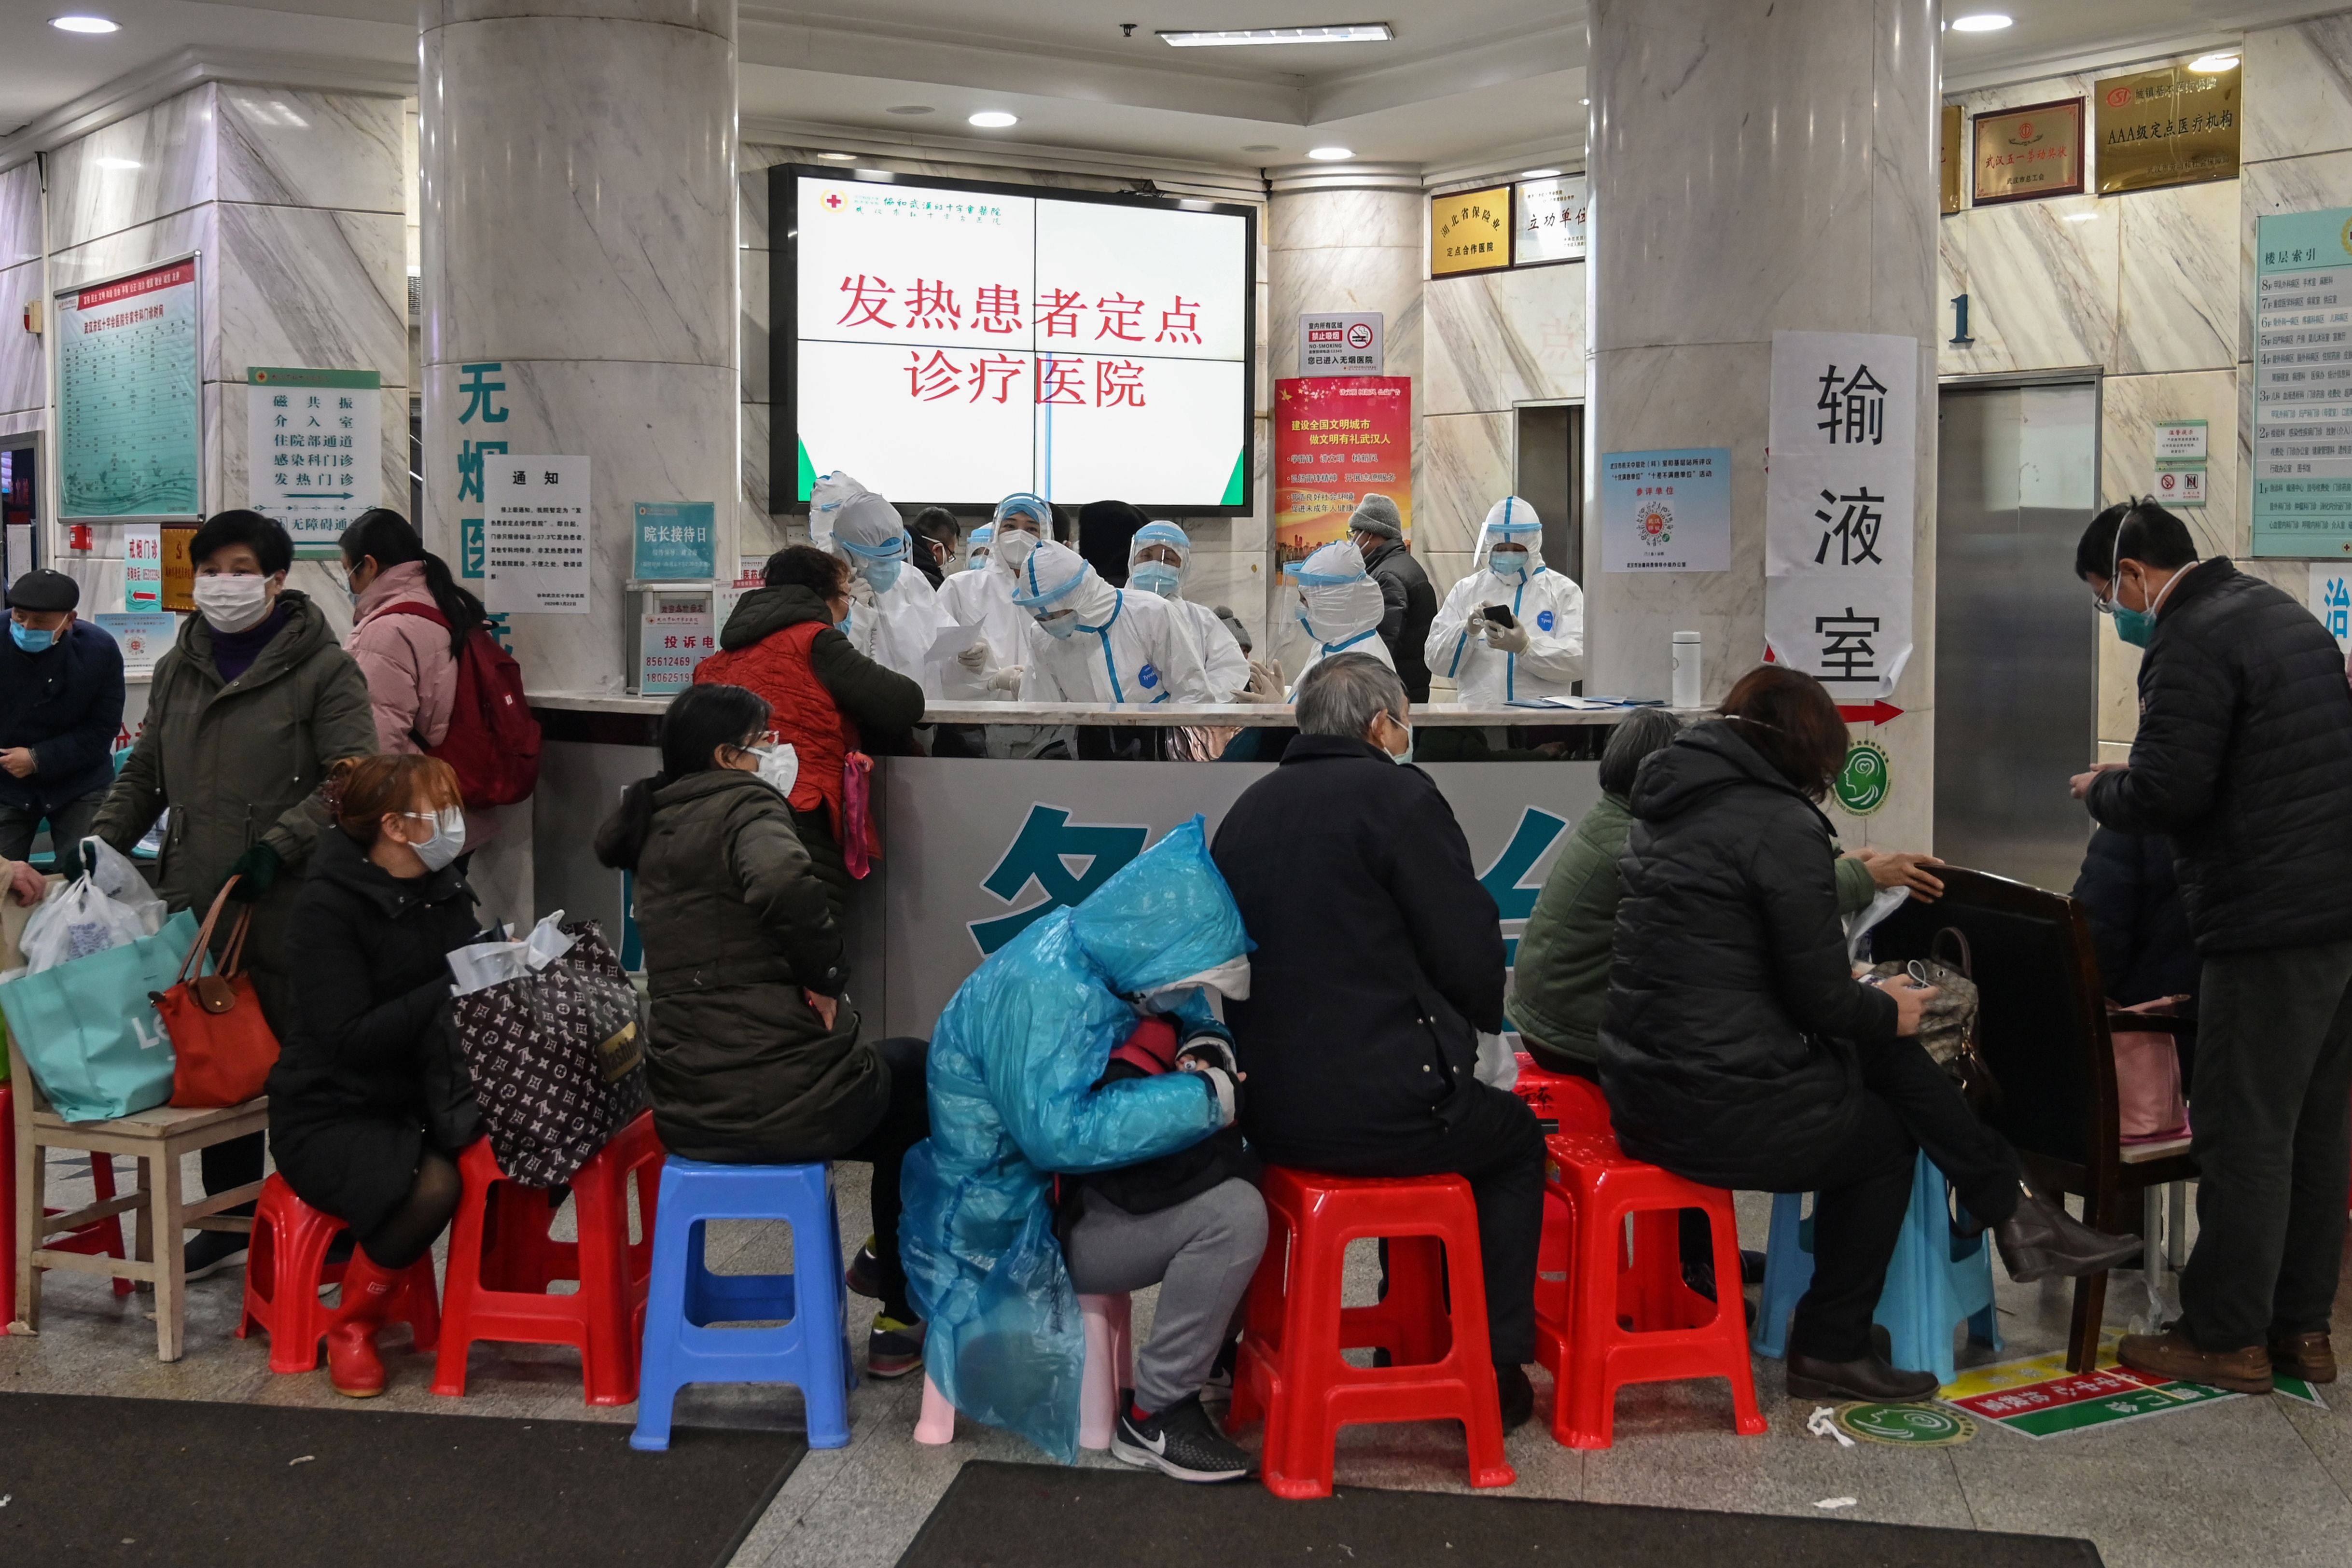 People wait as medical staff wear protective clothing to help stop the spread of the coronavirus at Wuhan Red Cross Hospital in Wuhan on January 25, 2020.